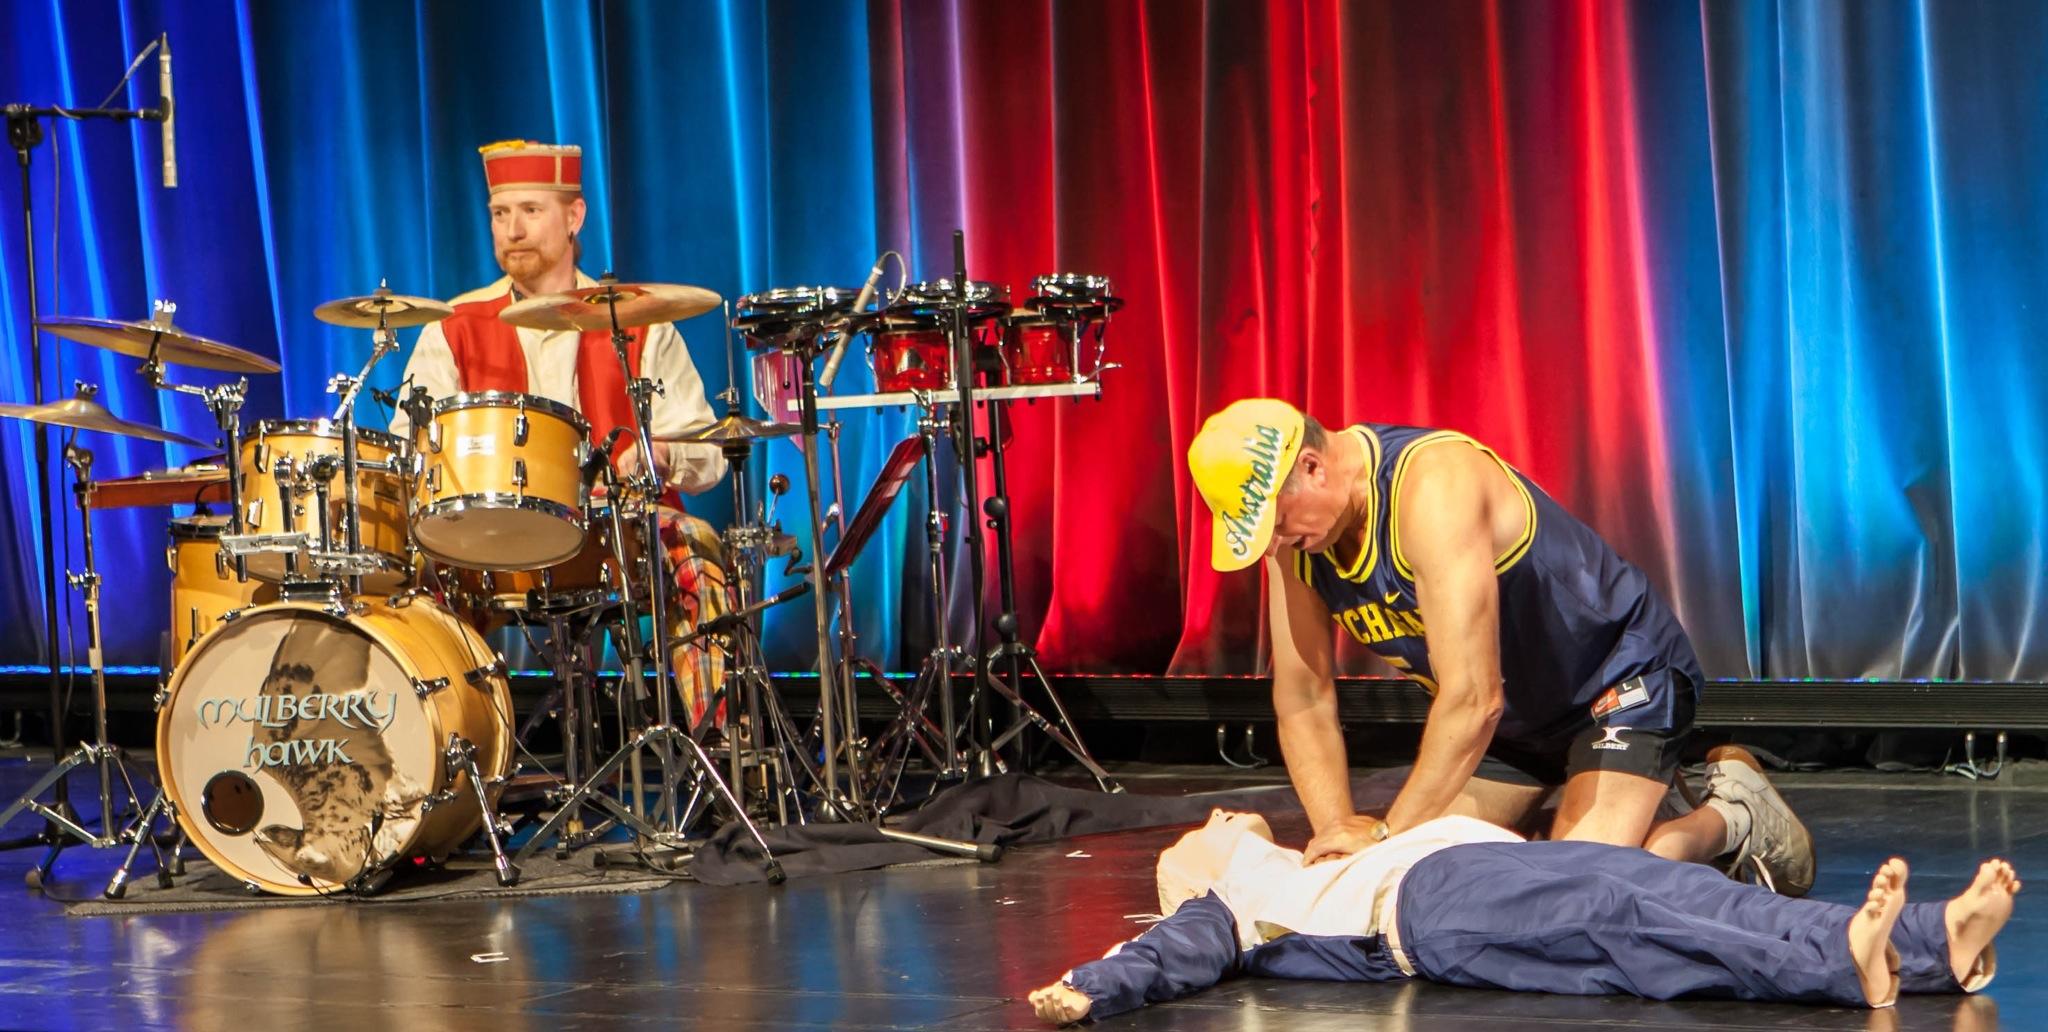 Performing CPR during the Paris show of The Legend of L'Inconnue